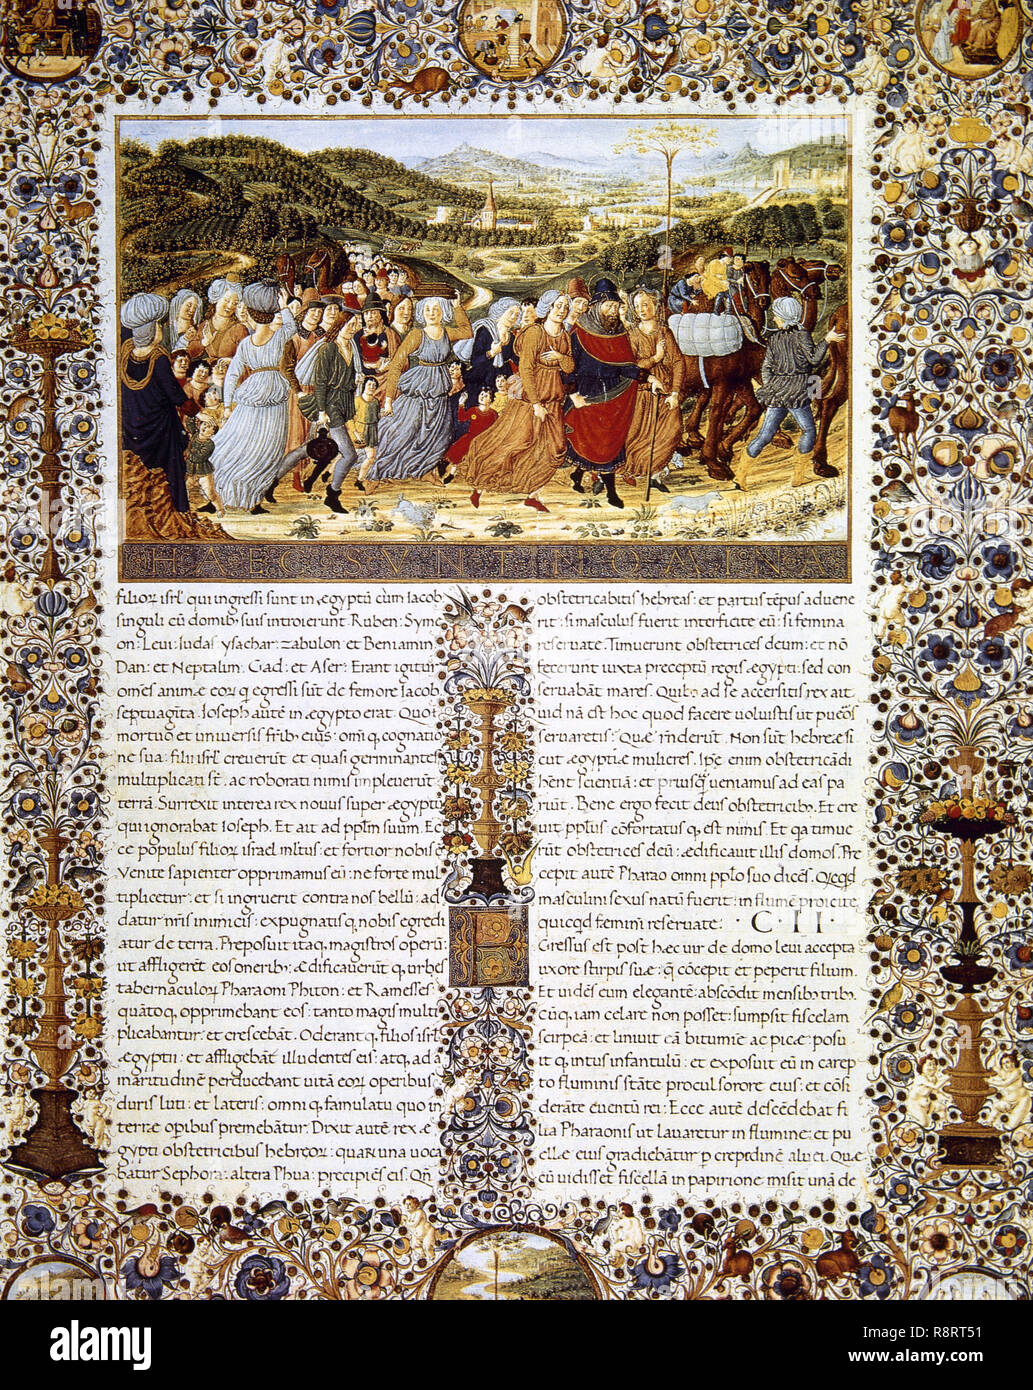 Urbinate Bible (1476-78). The Exodus. The departure of the Israelites from Egypt under the leadership of Moses to free them from slavery. Commissioned by Federico da Montefeltro and scribed by Hugues de Comminellis de Mazieres. Vatican Library. Stock Photo